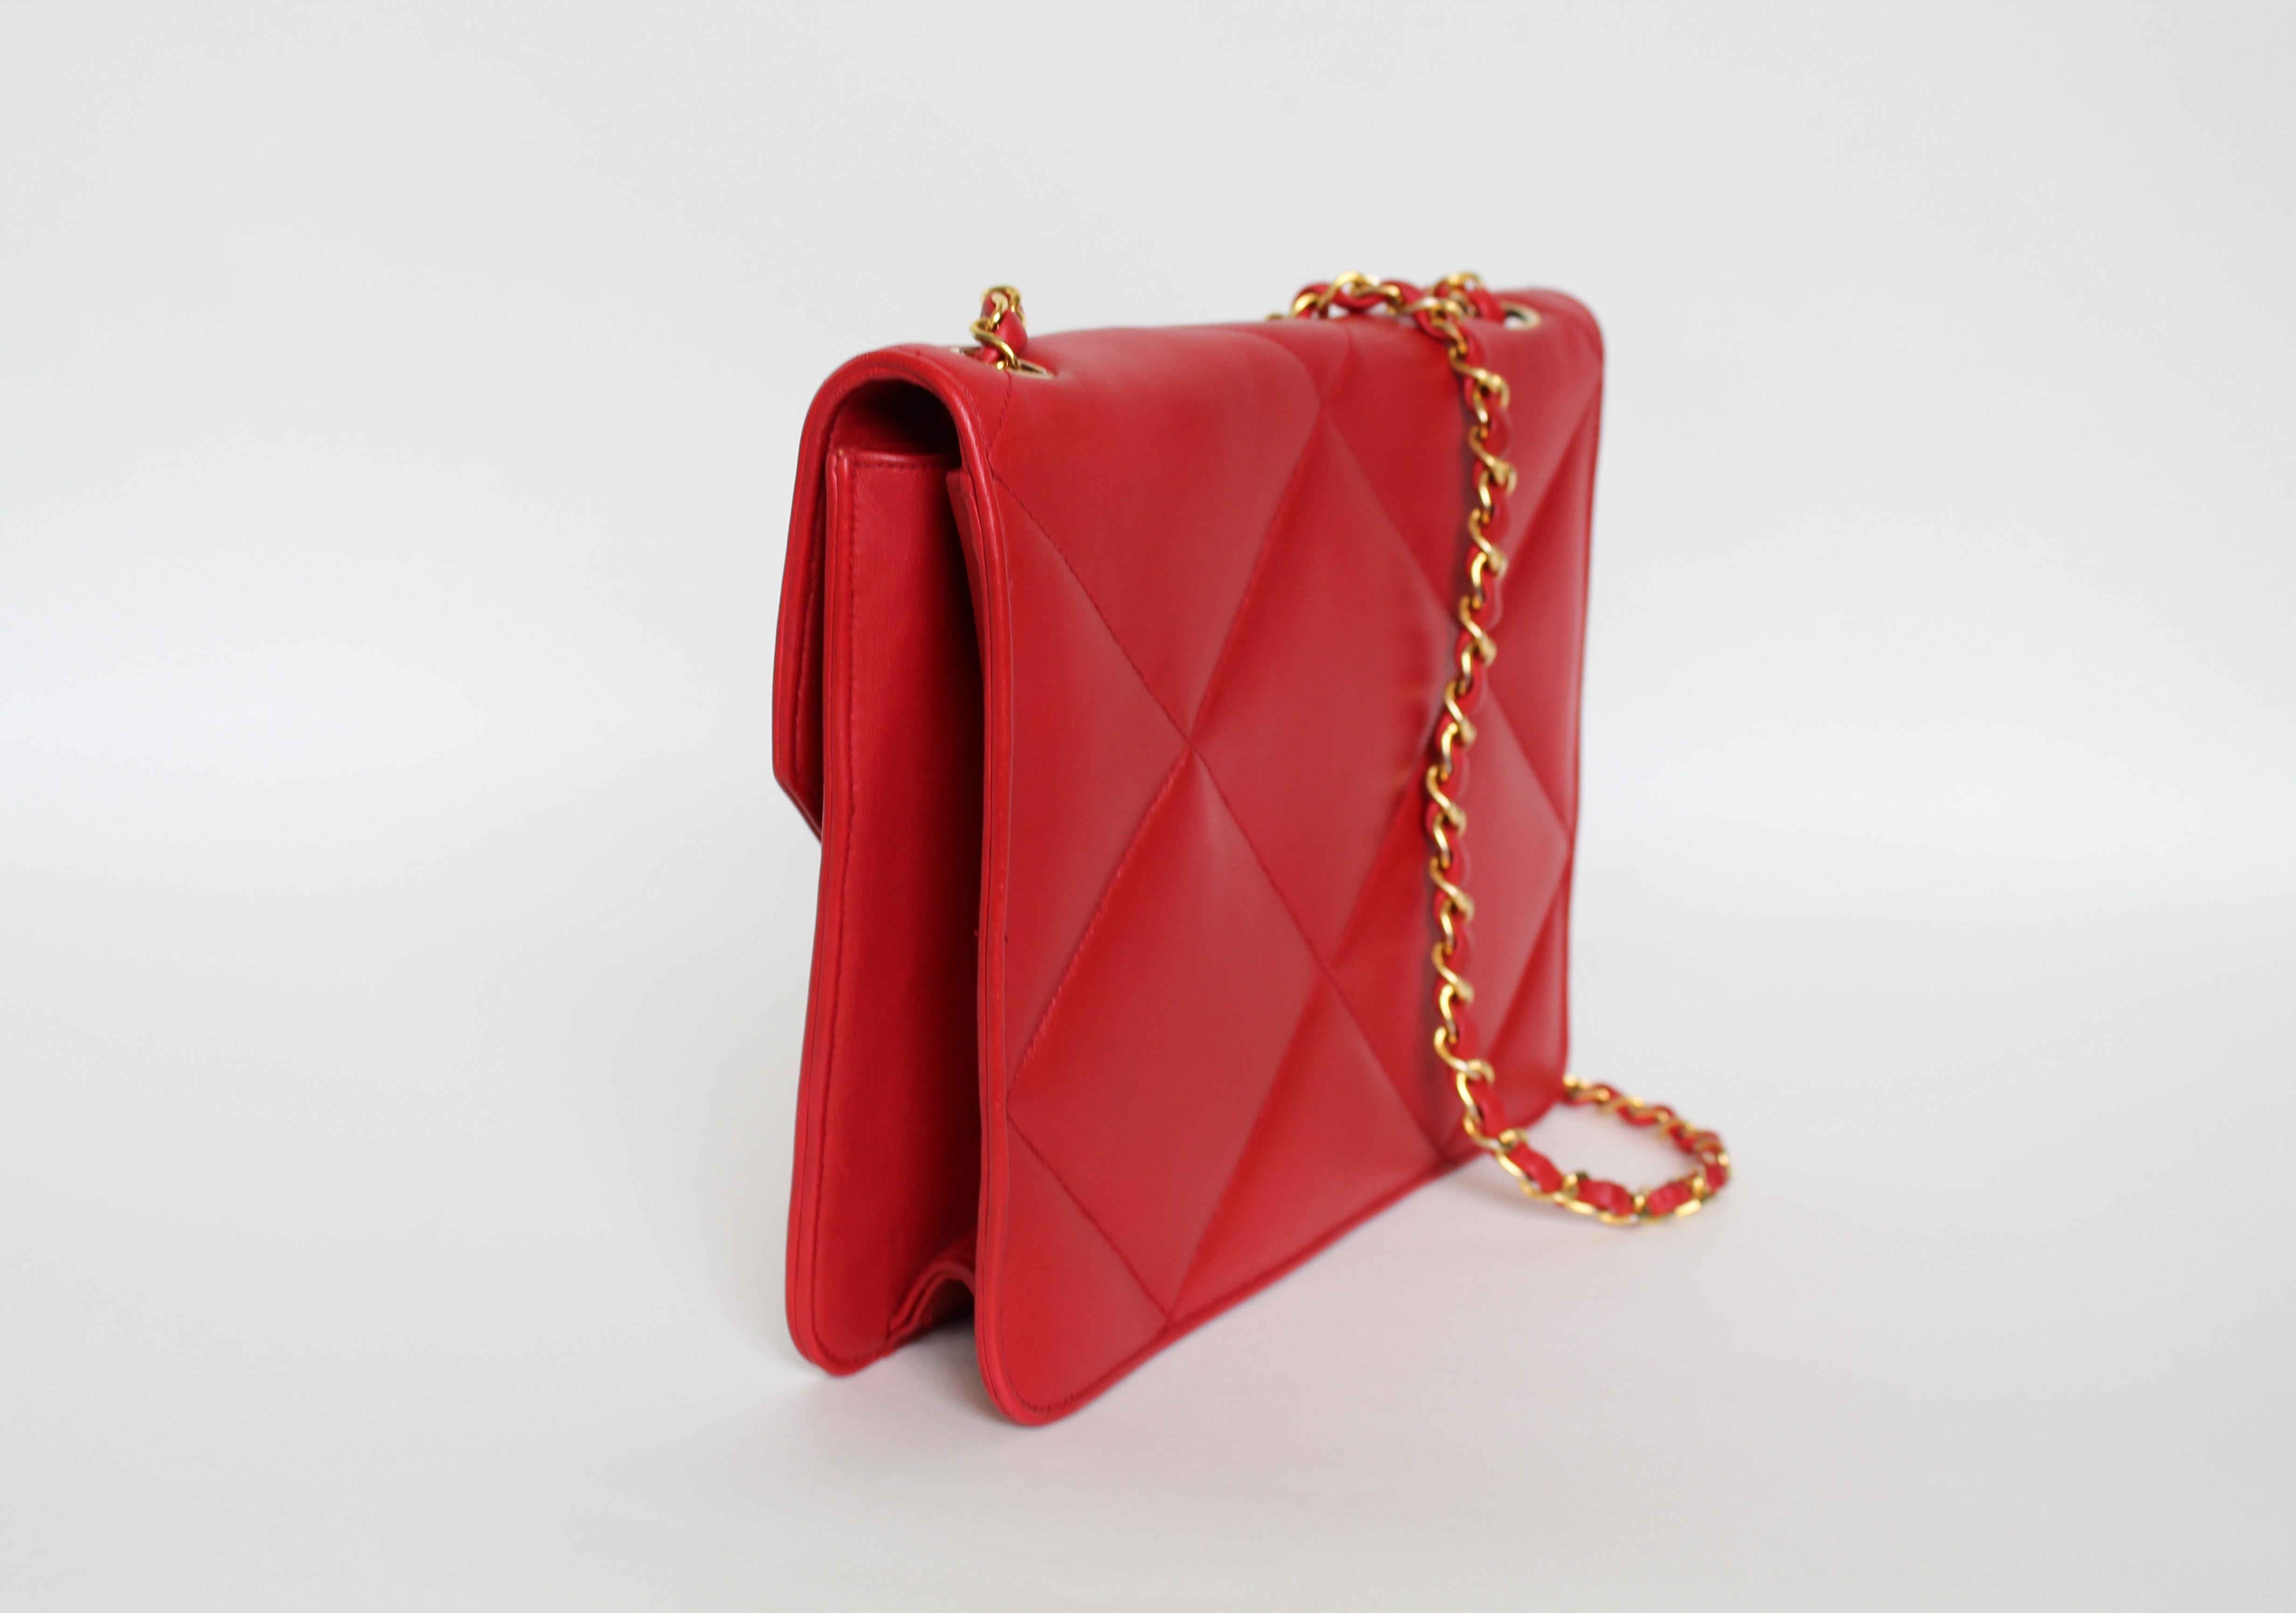 Classic Chanel 19 Vintage Rare 90s Jumbo Lambskin Red Envelope Flap Bag  For Sale 2